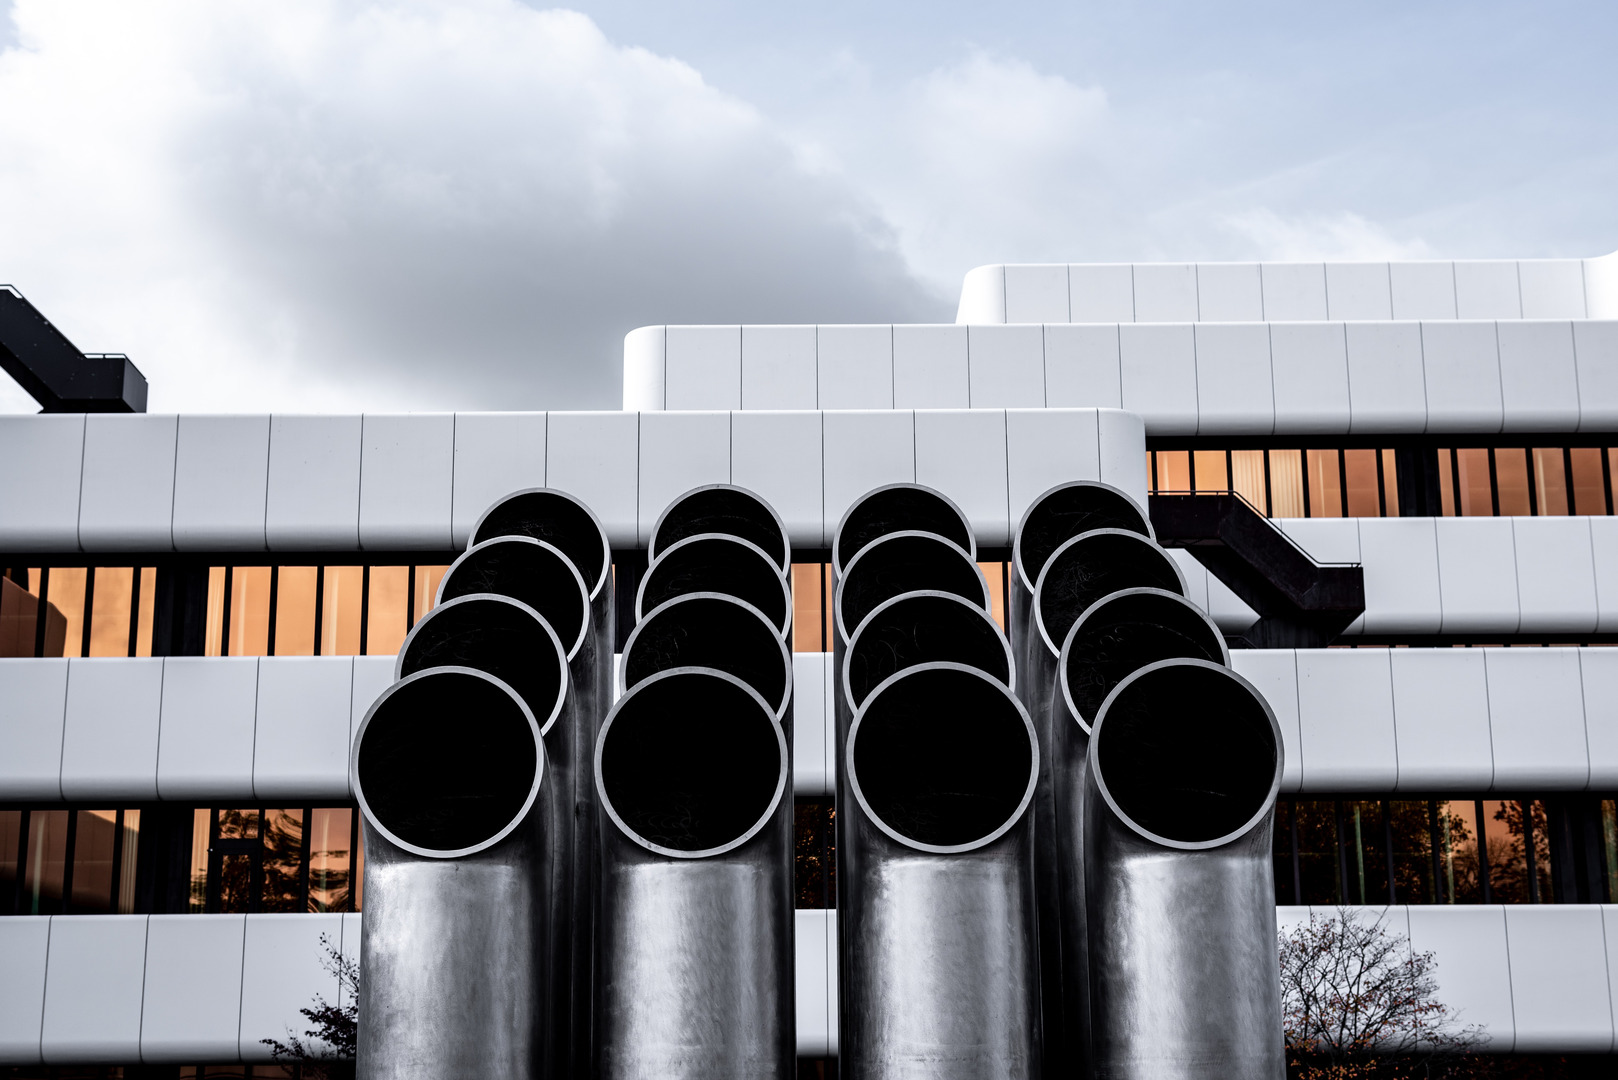 Extremely large pipes in front of a building coming from the ground